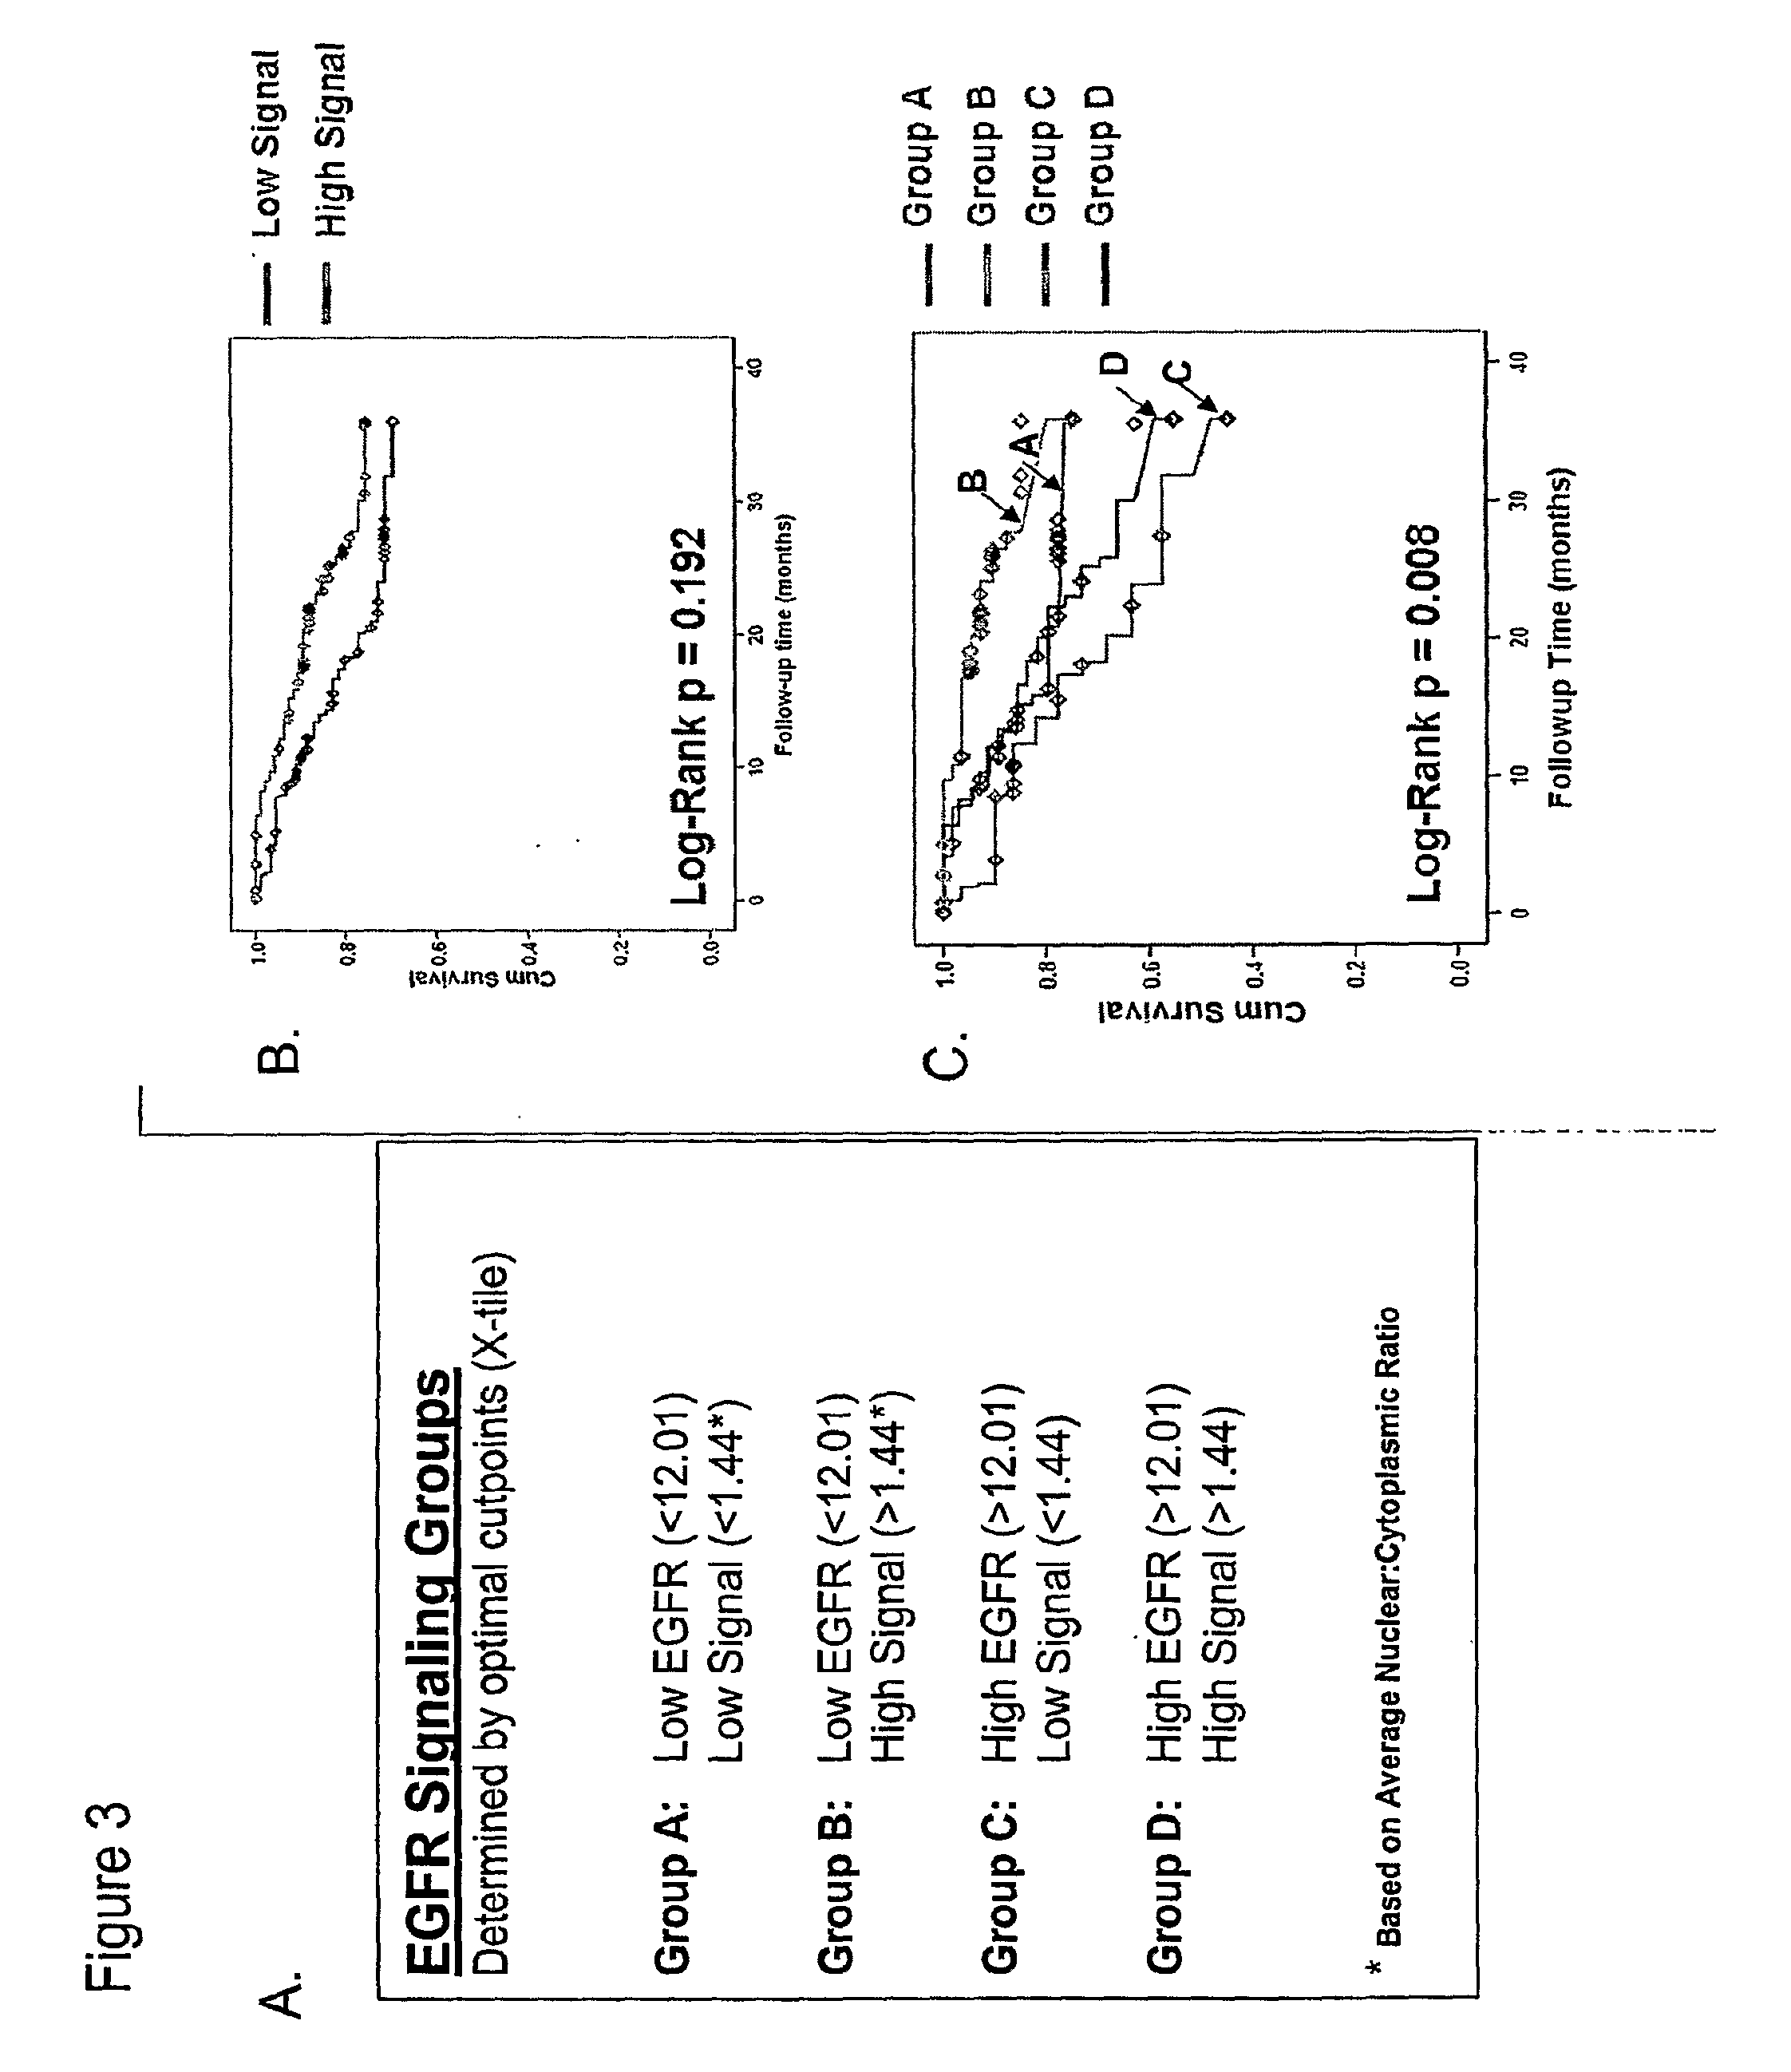 Methods for determining signal transduction activity in tumors